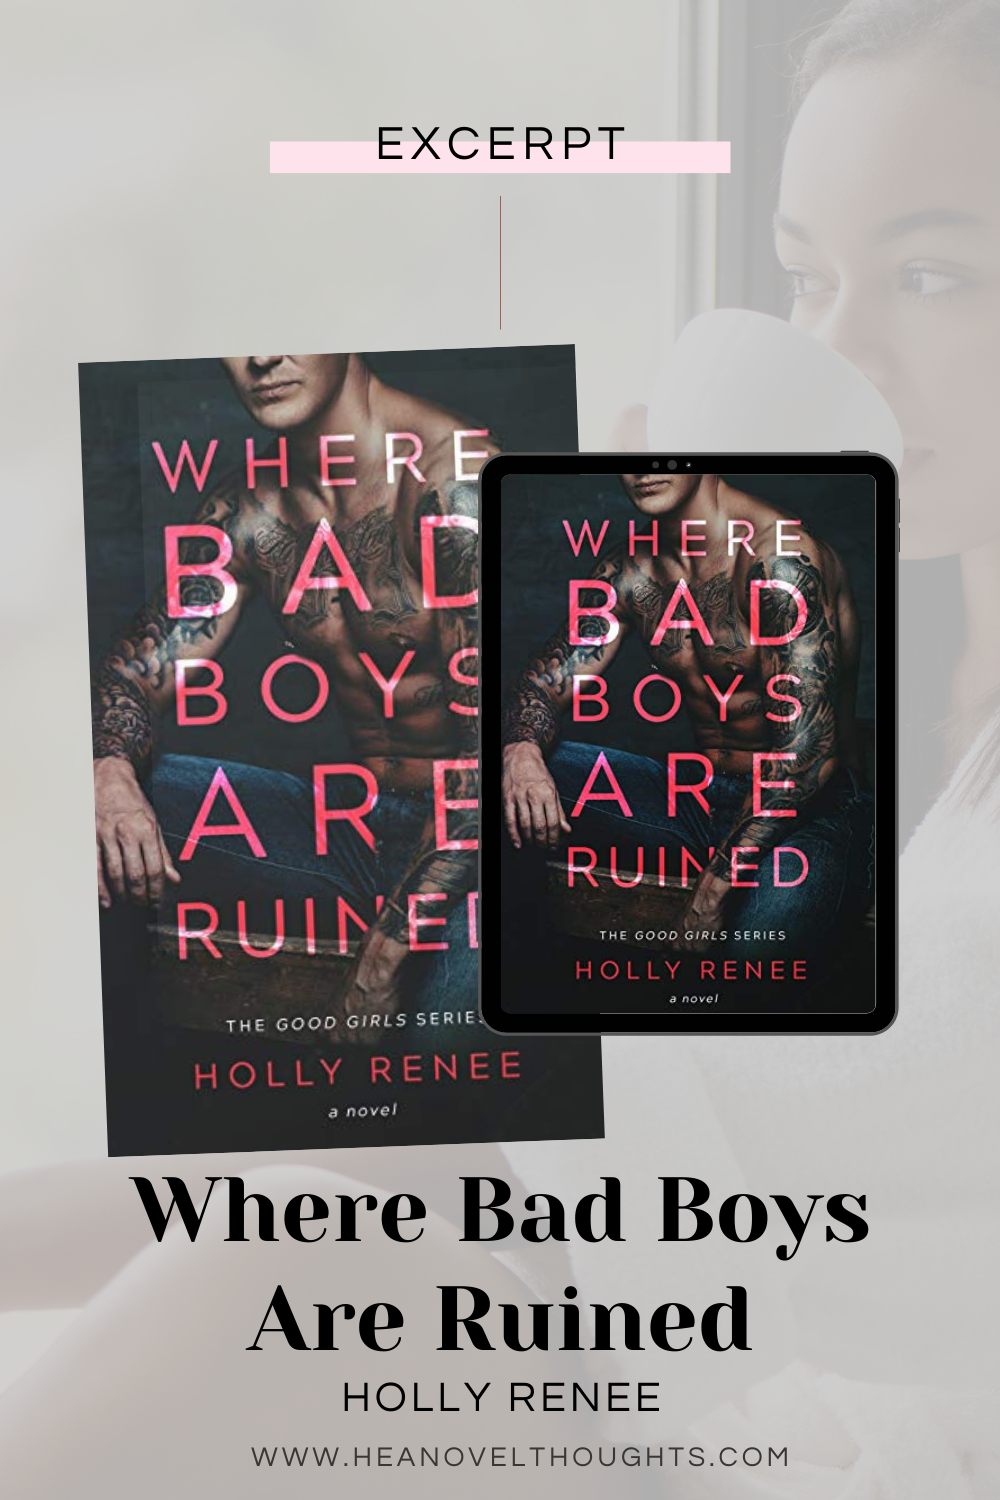 Excerpt of Where Bad Boys Are Ruined